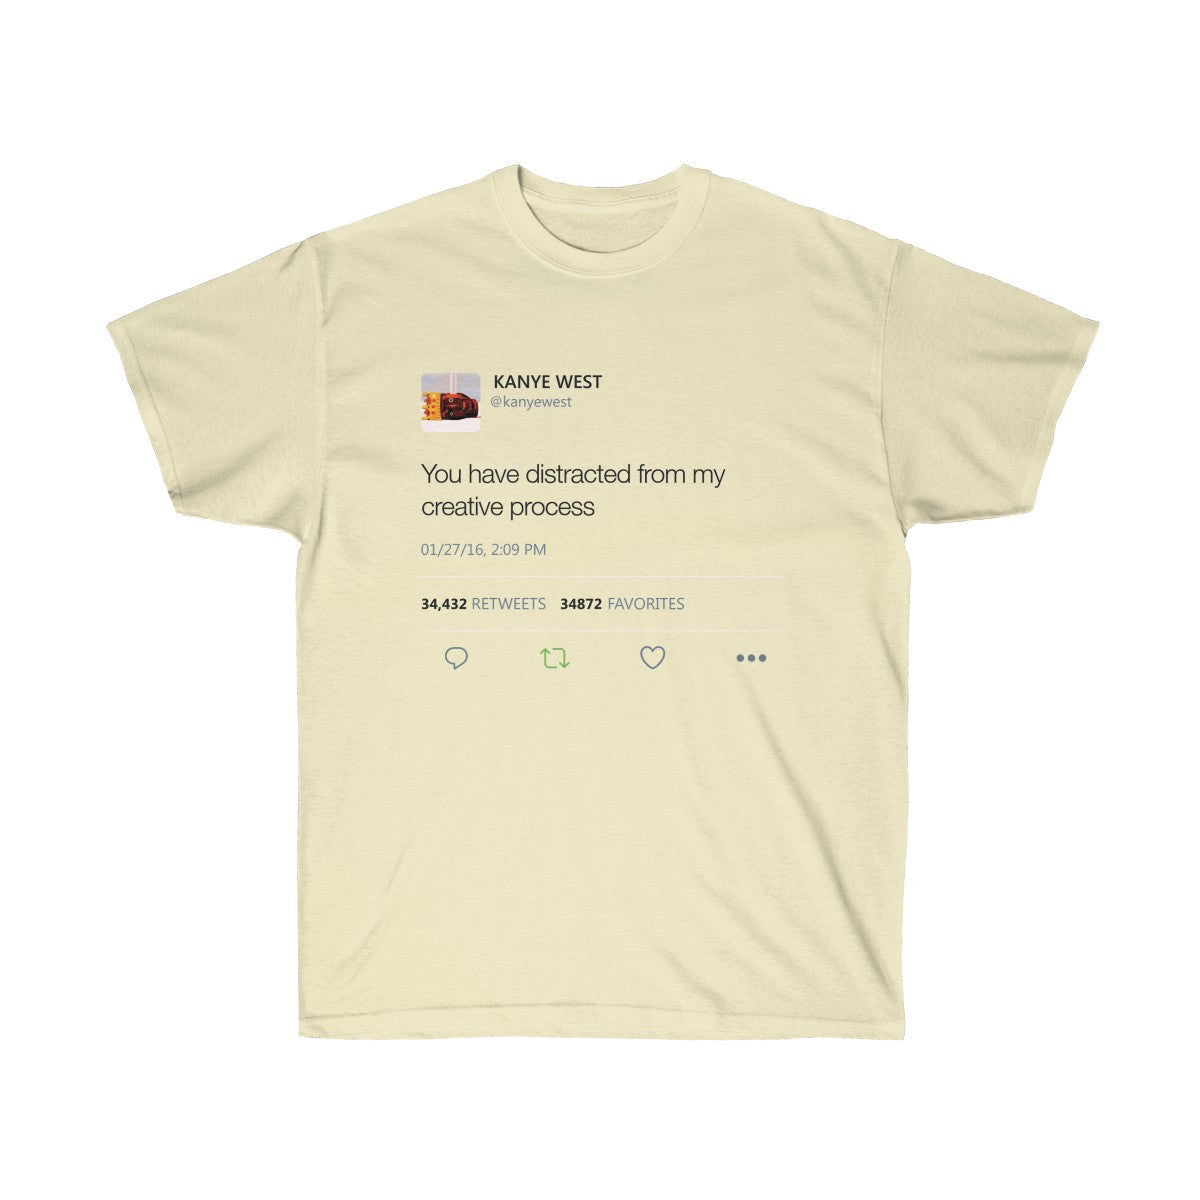 You have distracted from my creative process - Kanye West Tweet T-Shirt-Natural-S-Archethype